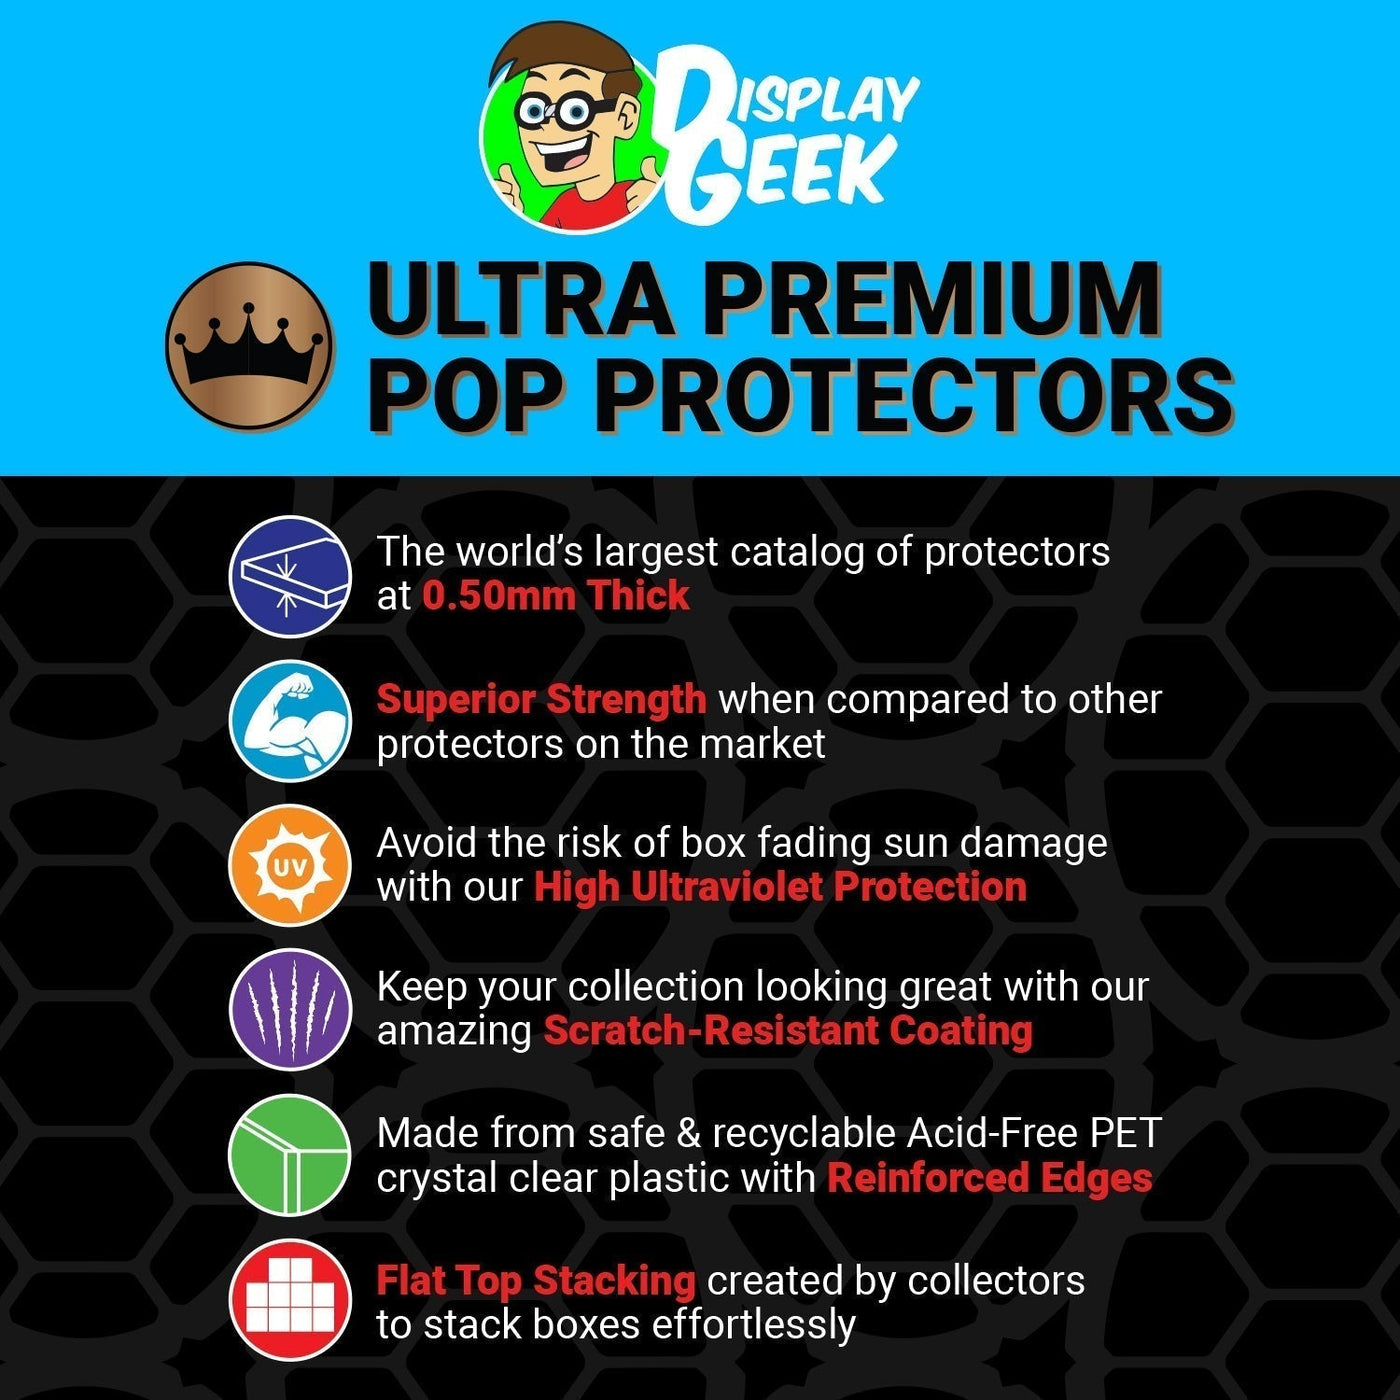 Pop Protector for 6 inch War Hammer Titan #1449 Super Size Funko Pop on The Protector Guide App by Display Geek